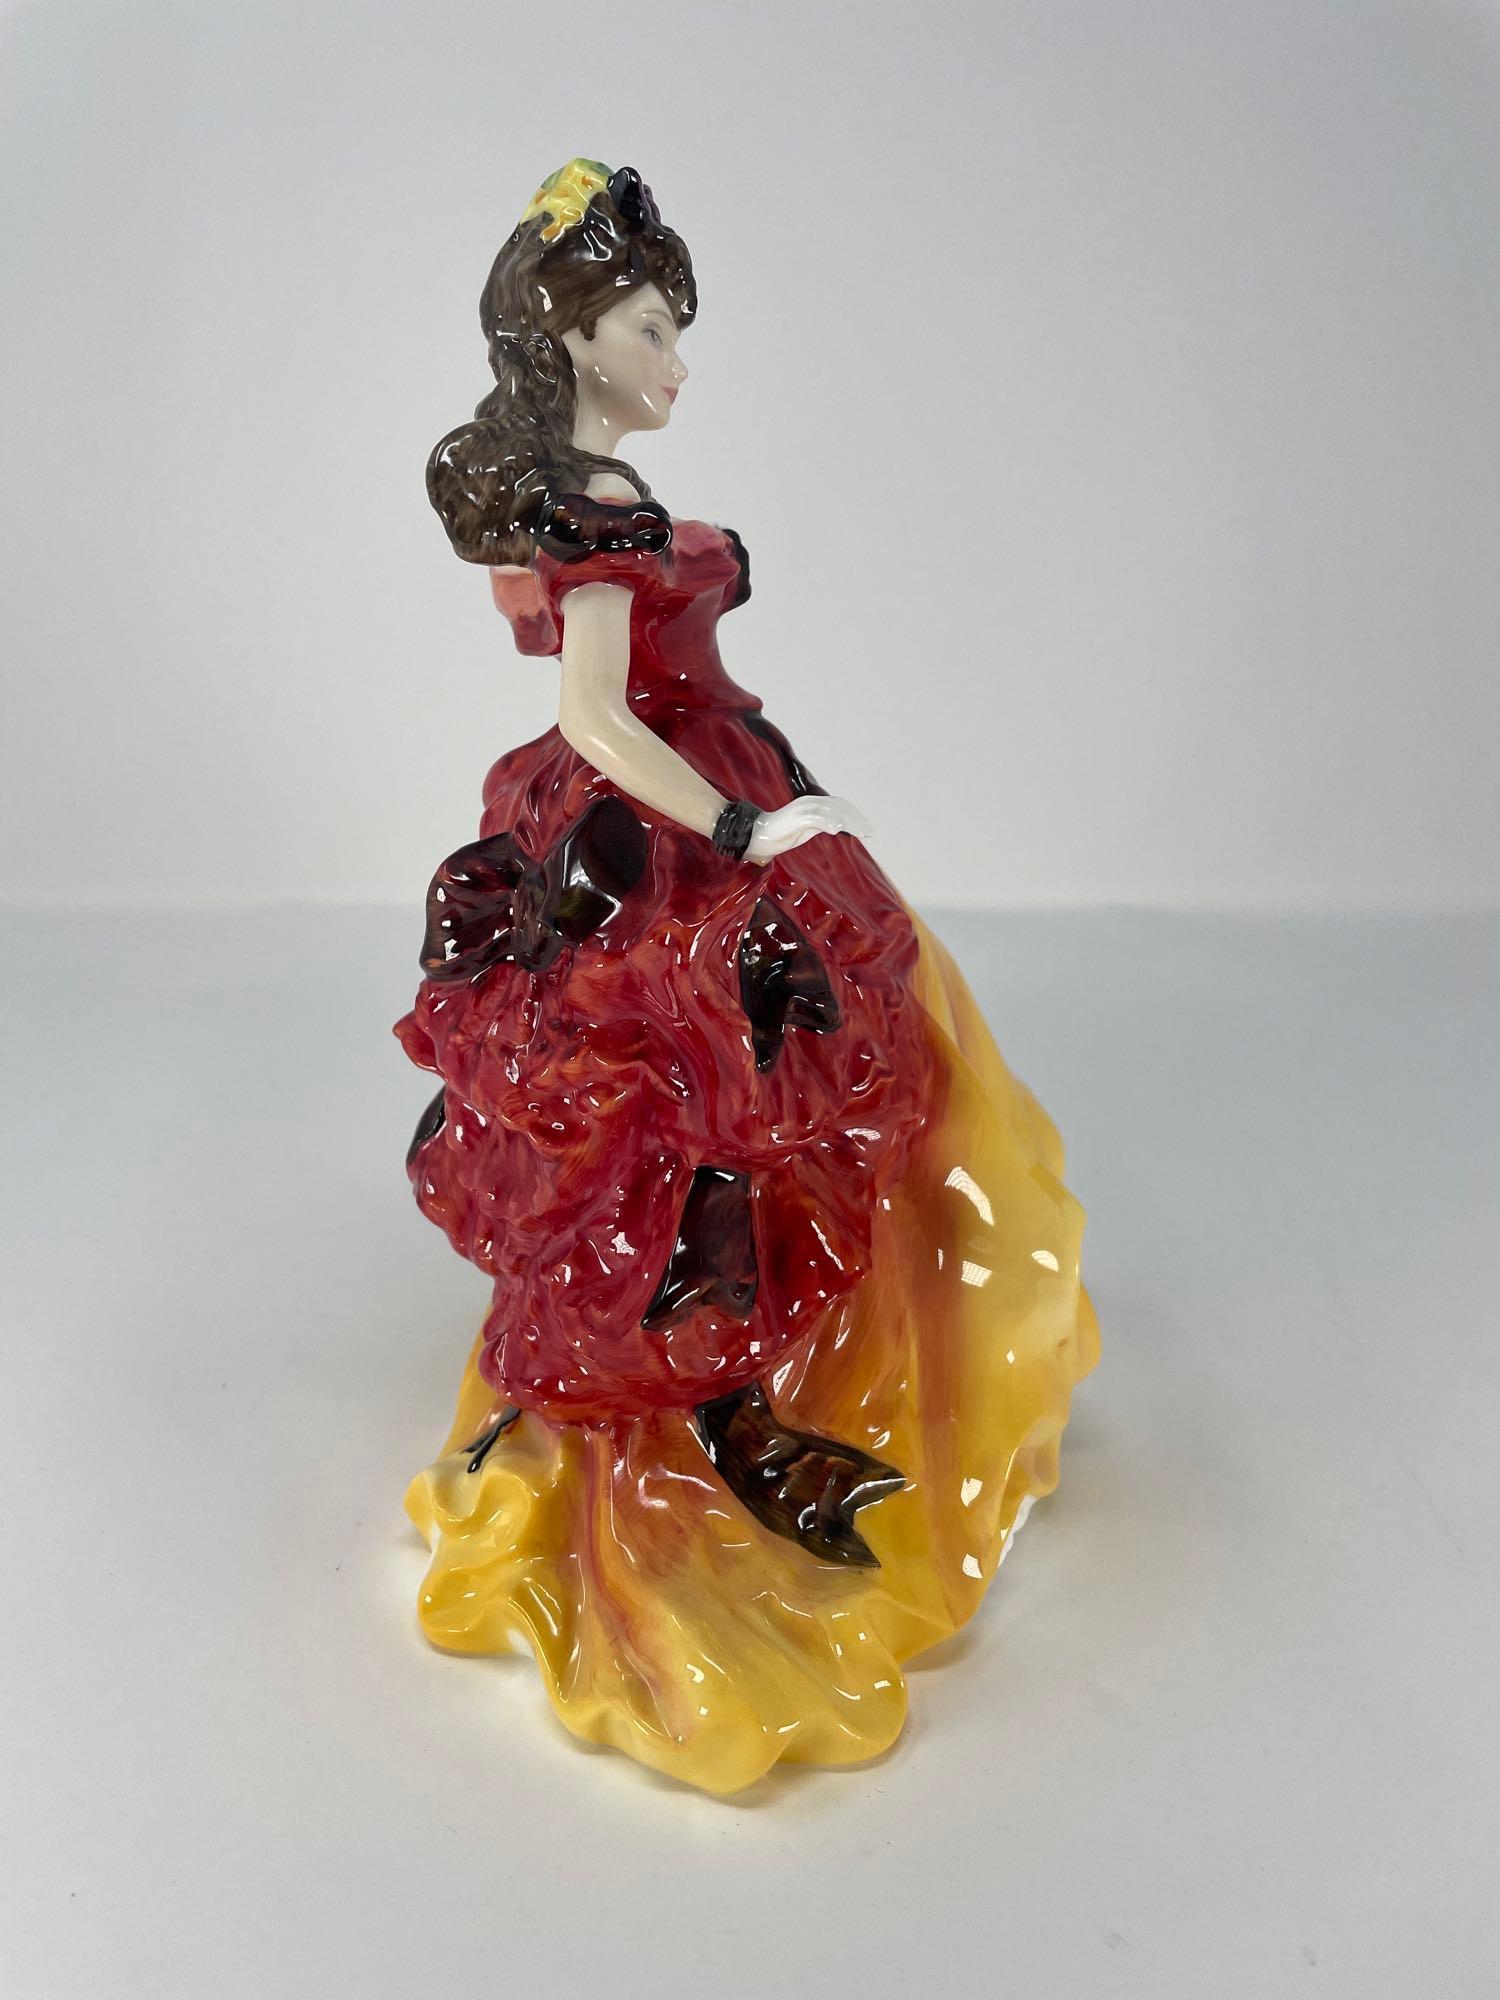 1996 Royal Doulton Figure of the Year "Belle" HN 3703